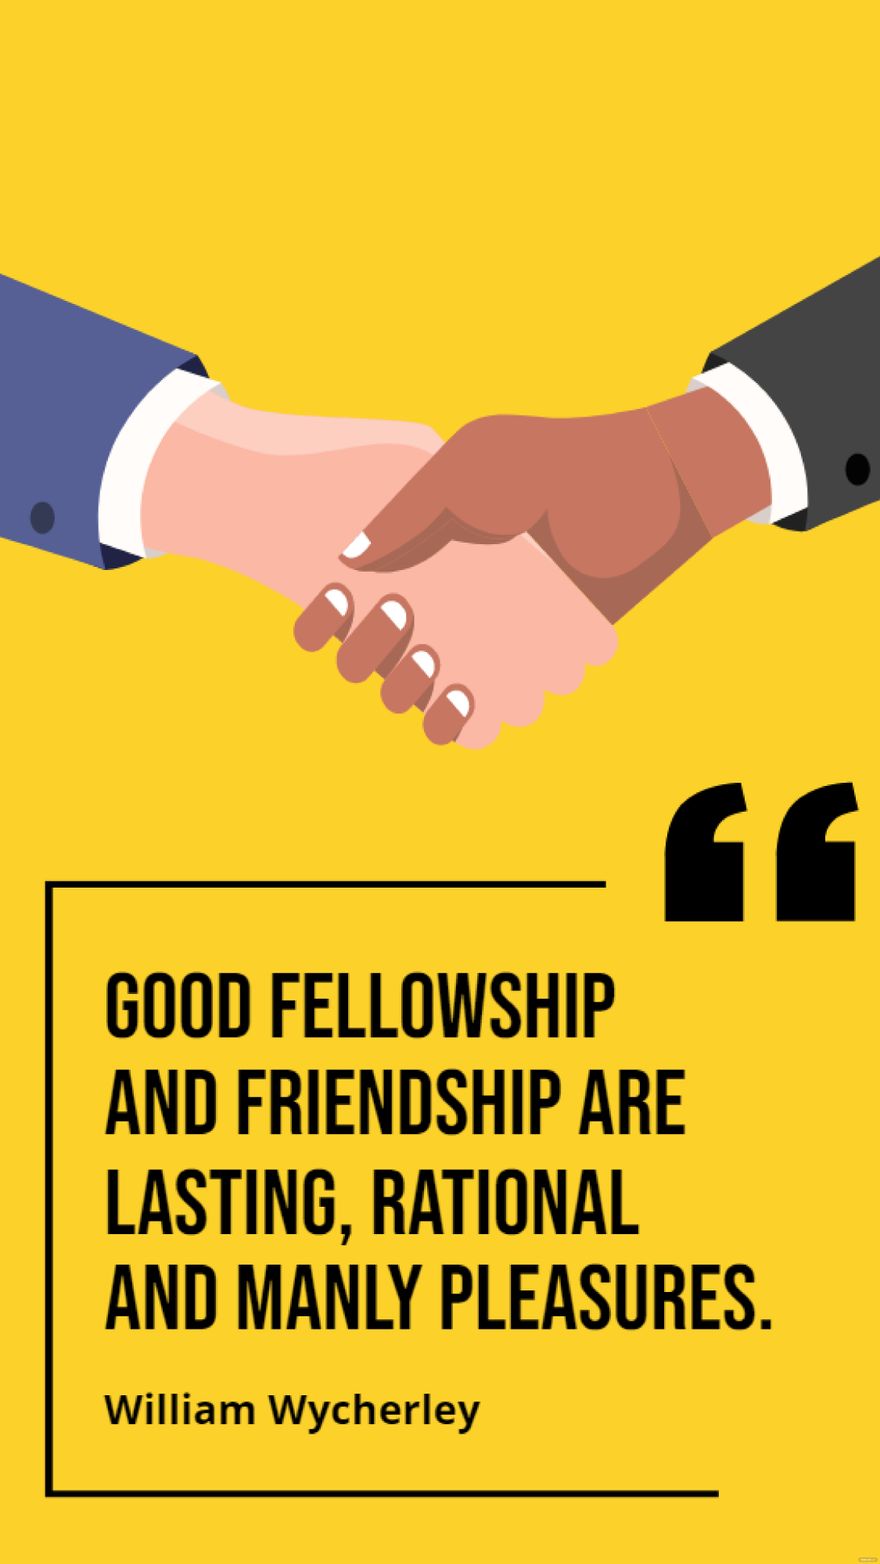 William Wycherley - Good fellowship and friendship are lasting, rational and manly pleasures.